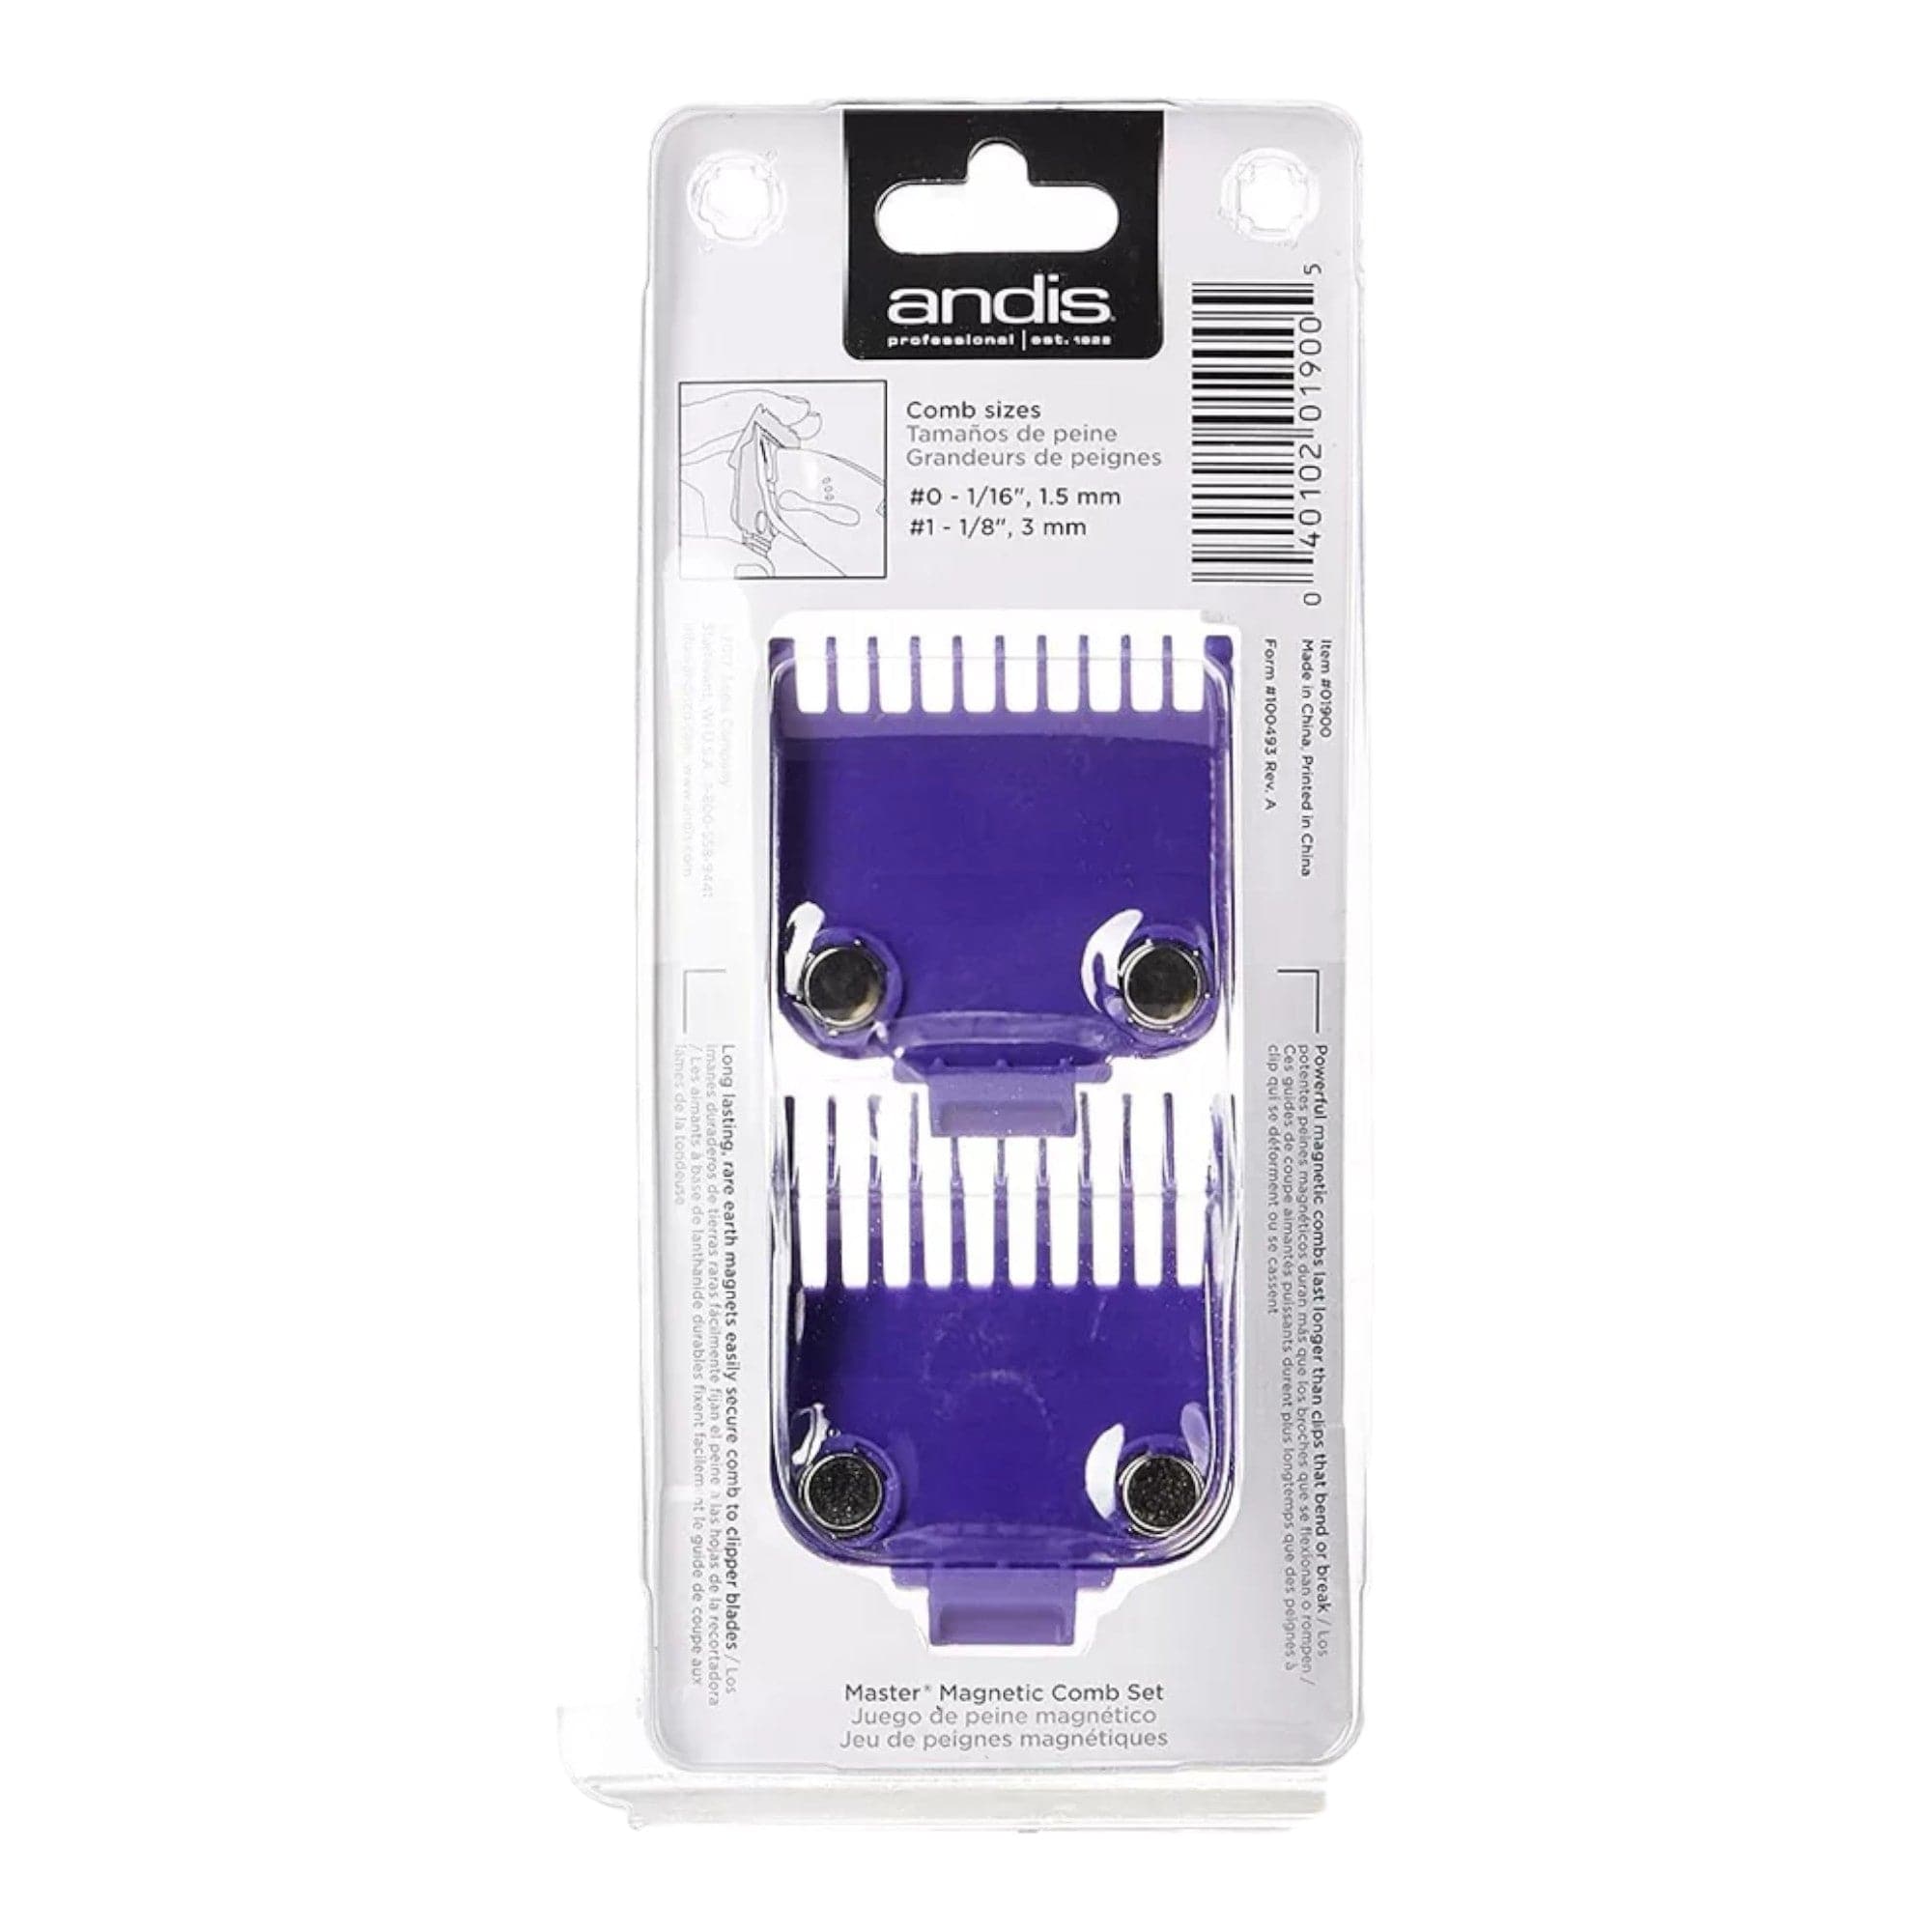 Andis - Master Dual Magnetic Comb Guards Set 01900 0 & 1